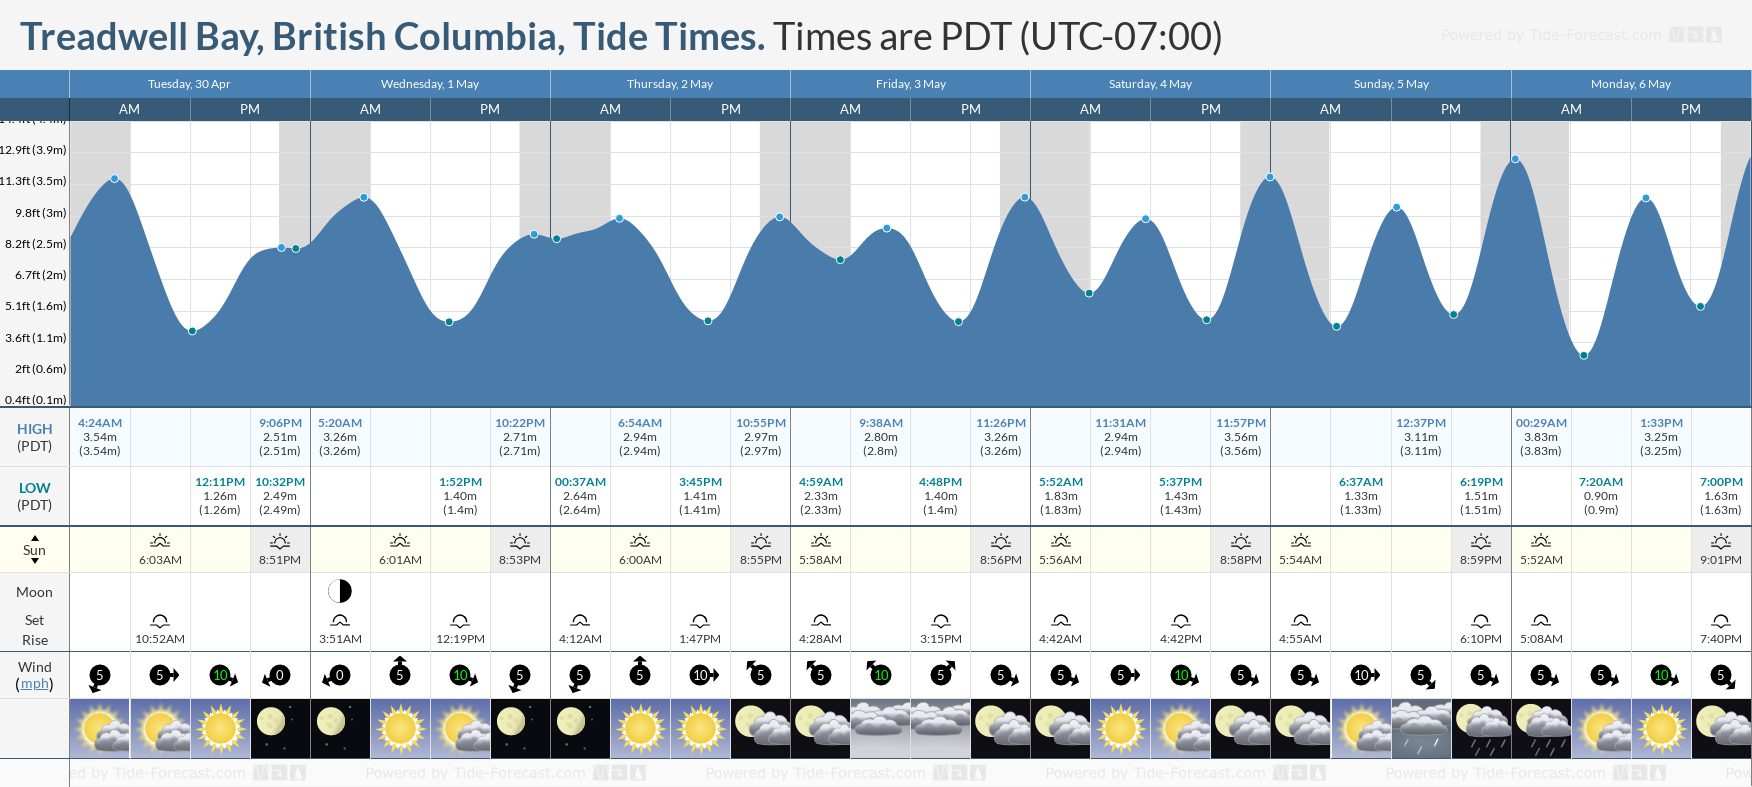 Treadwell Bay, British Columbia Tide Chart including high and low tide tide times for the next 7 days